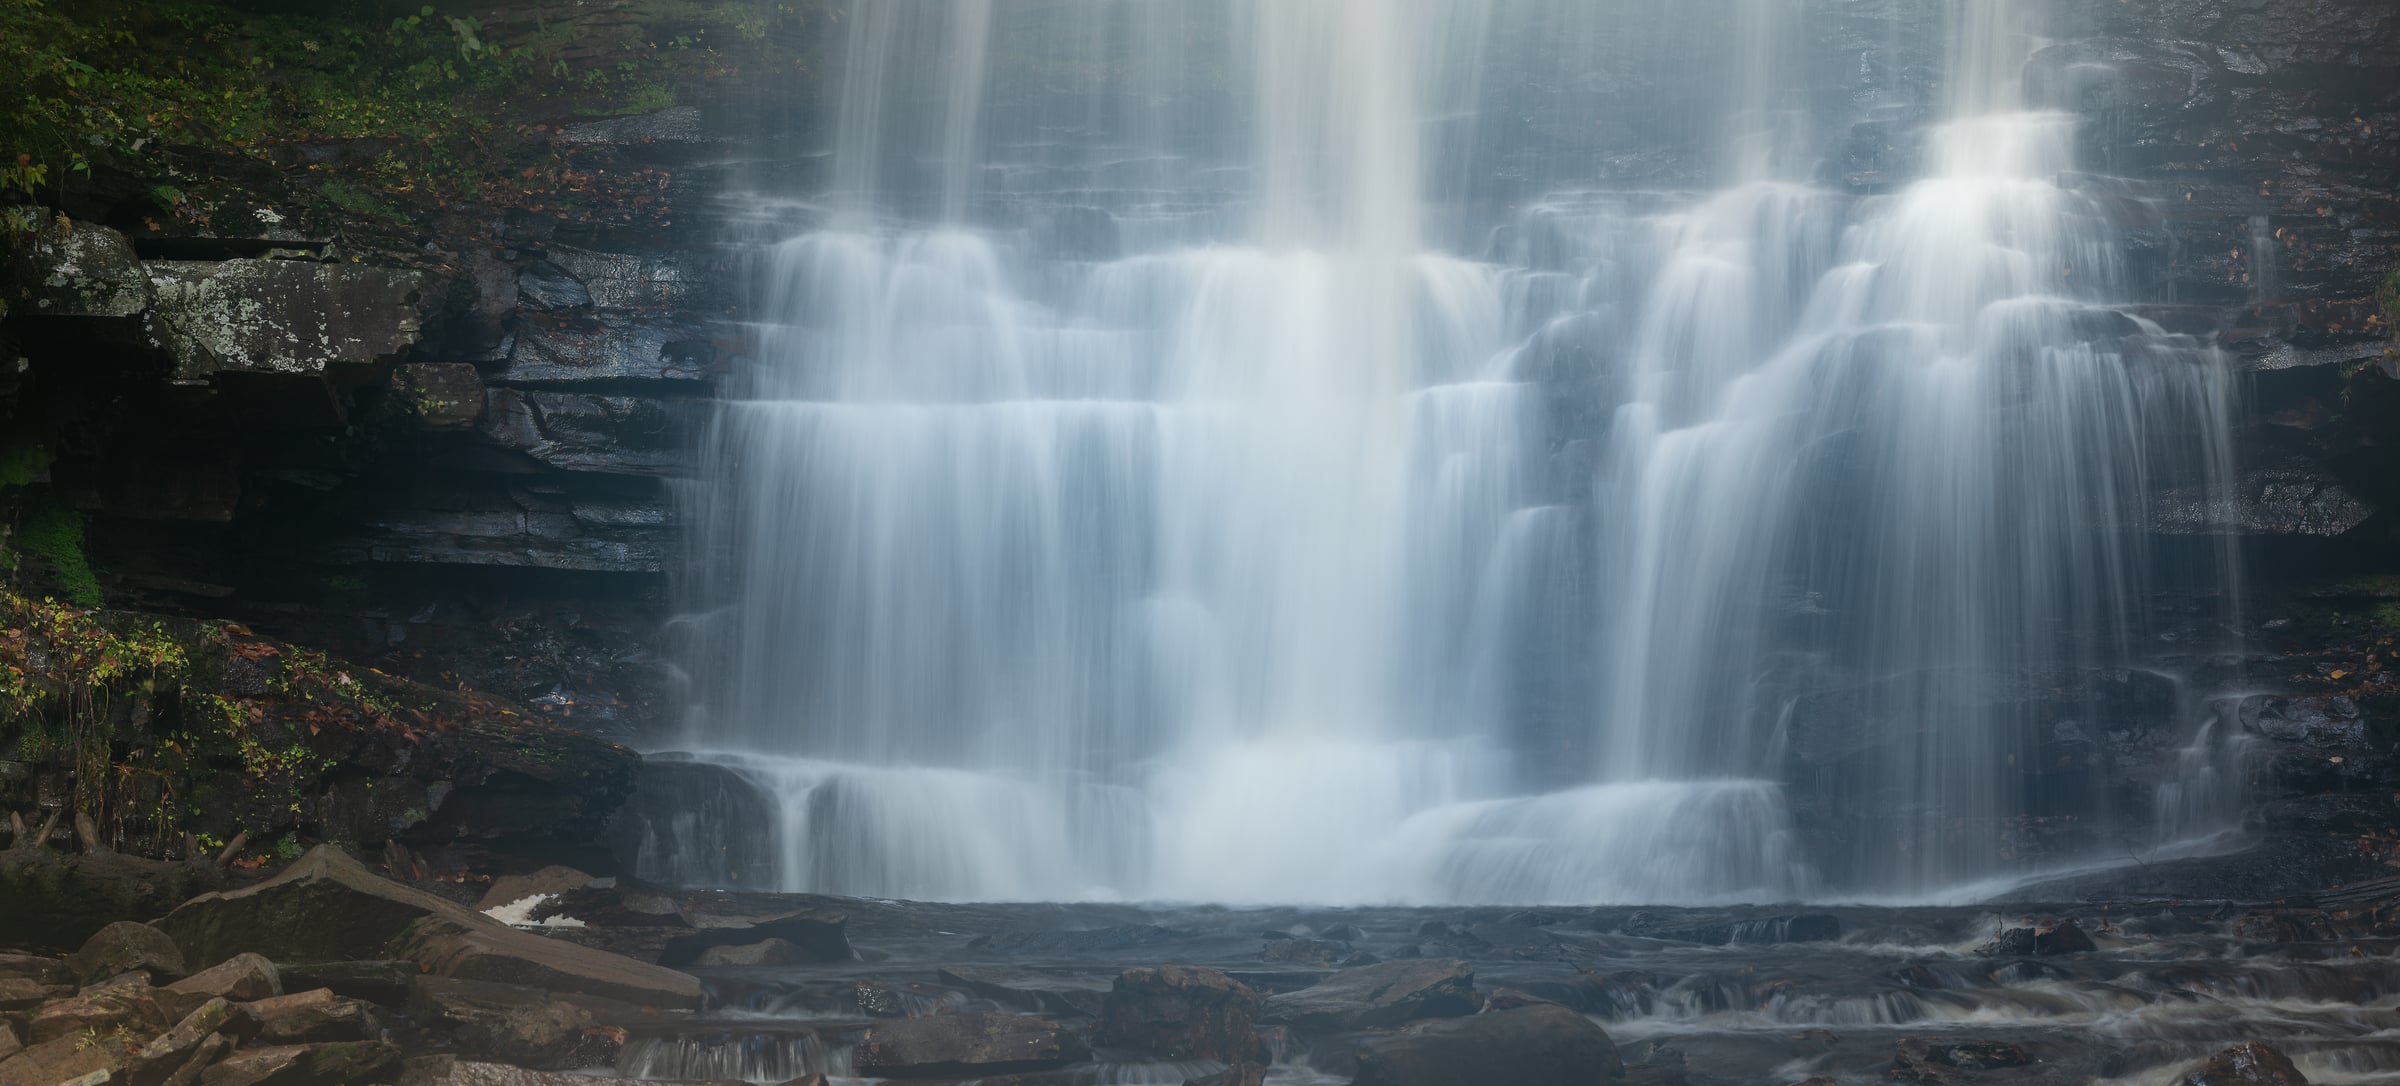 140 megapixels! A very high resolution, large-format VAST photo print of a waterfall in Pennsylvania; nature photograph created by Greg Probst in Ricketts Glen State Park, Pennsylvania.